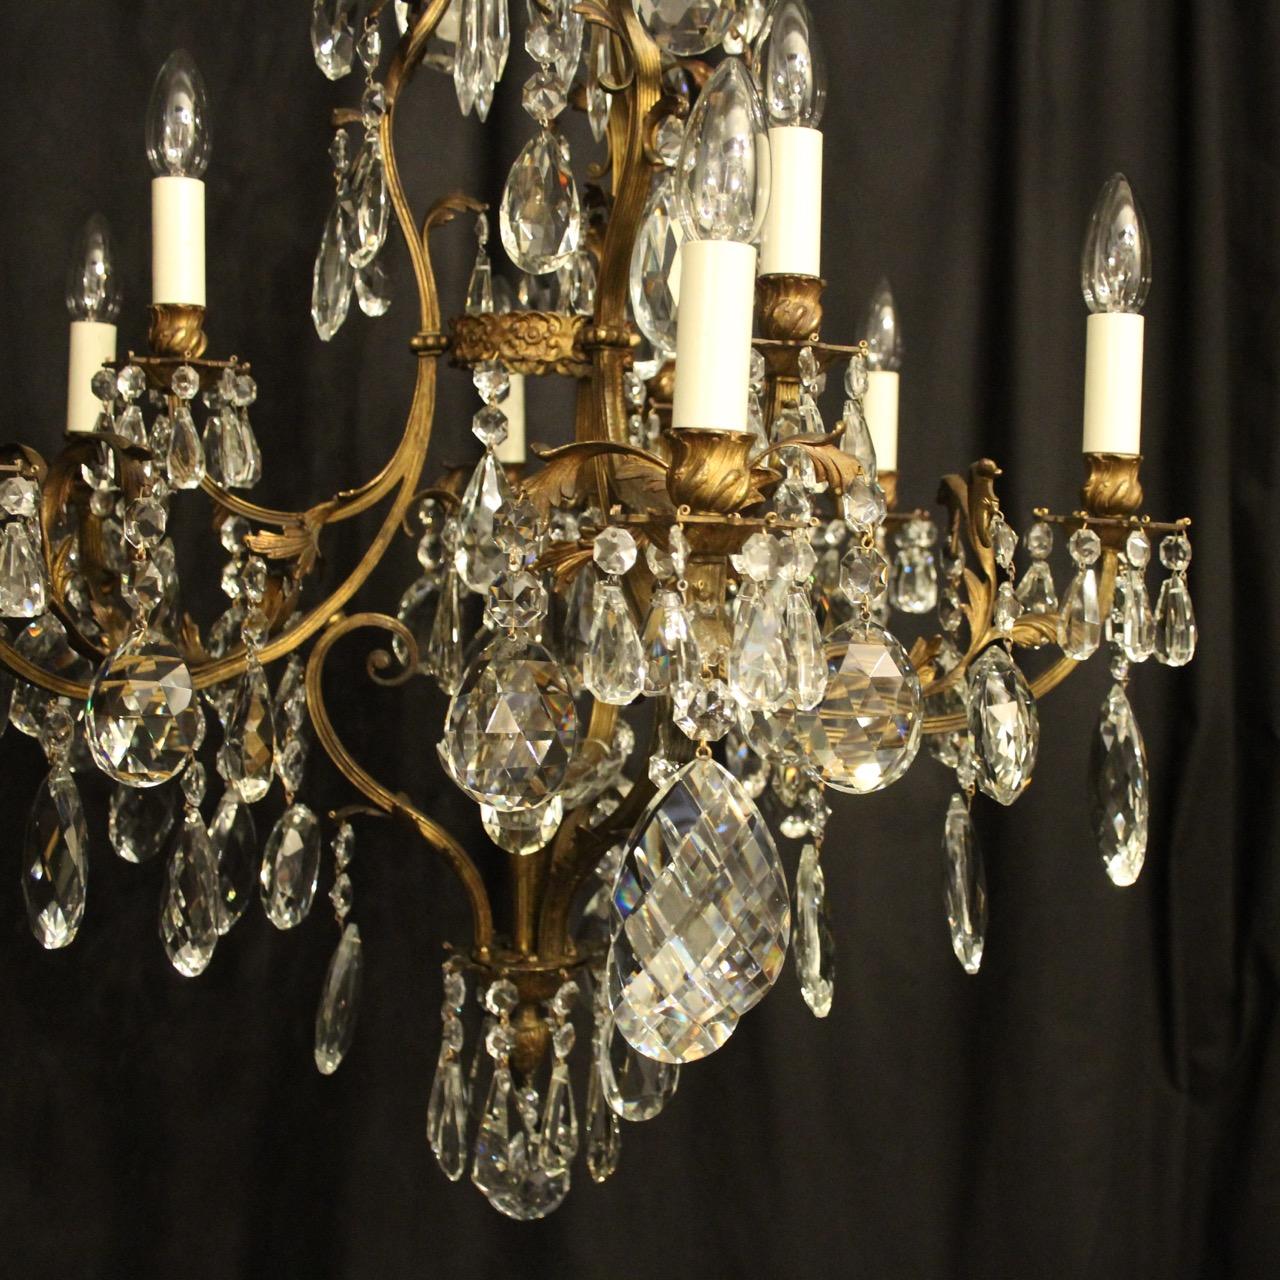 A French gilded bronze and crystal 10 light birdcage form tiered antique chandelier, the square gauge leaf clad reeded scrolling arms with sectional bobeche drip pans and leaf candle sconces, issuing from an foliated cage form interior with a single